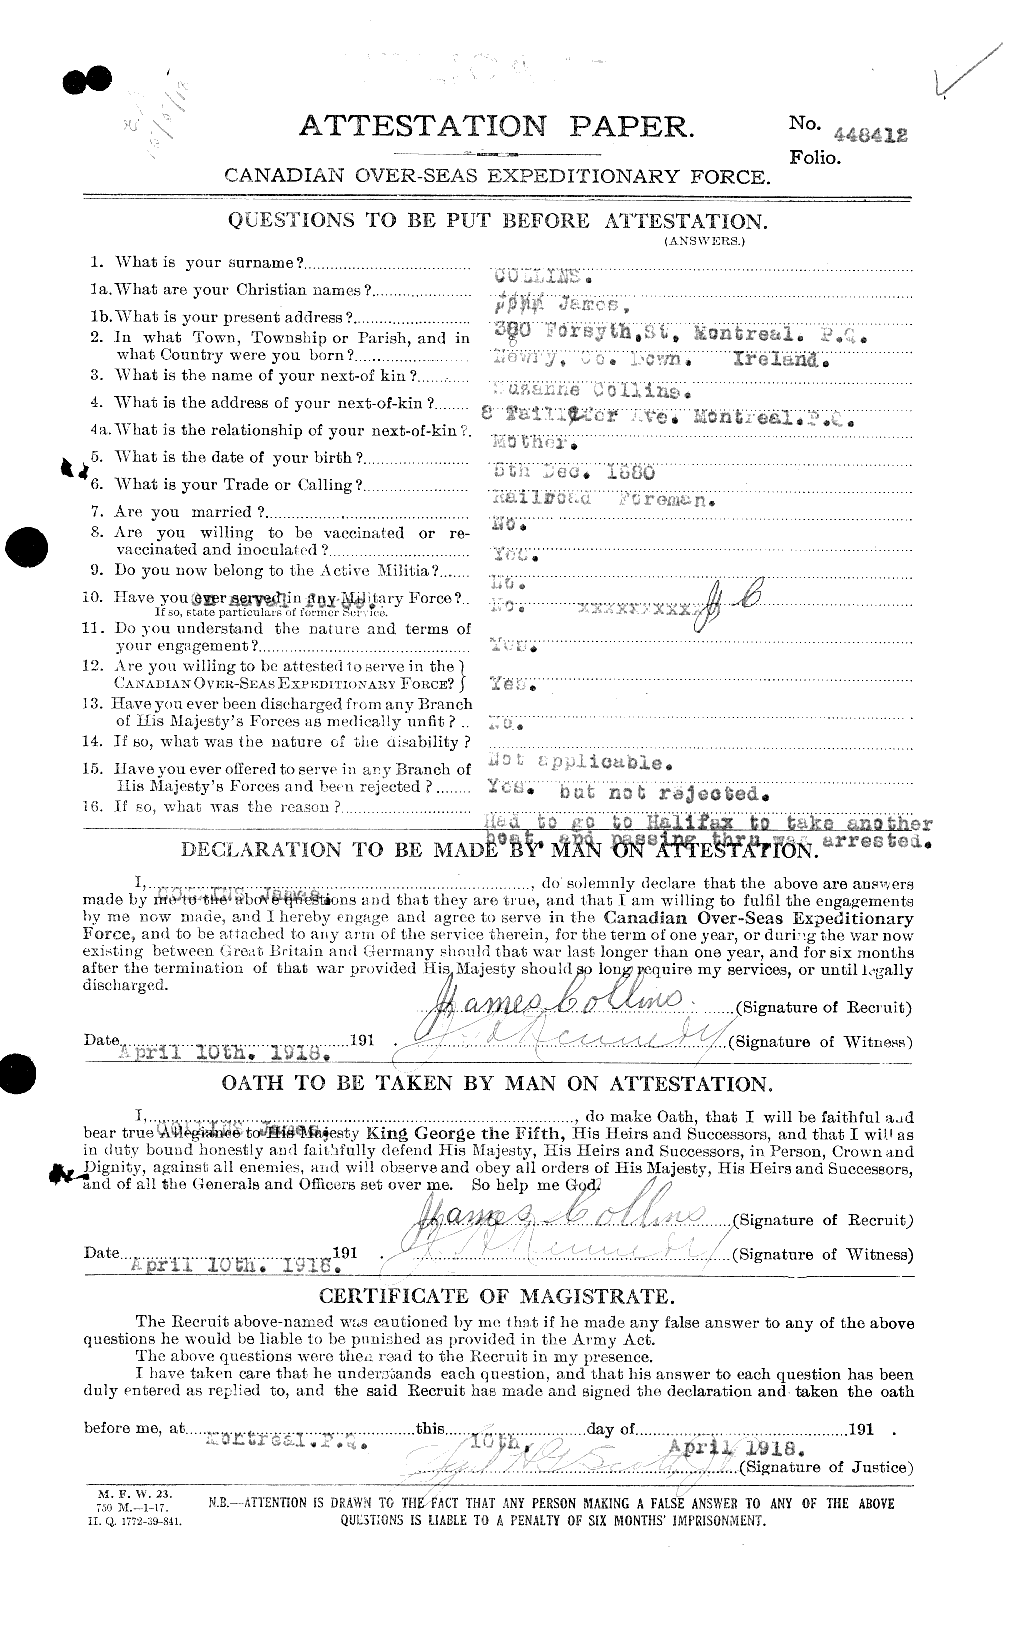 Personnel Records of the First World War - CEF 037907a